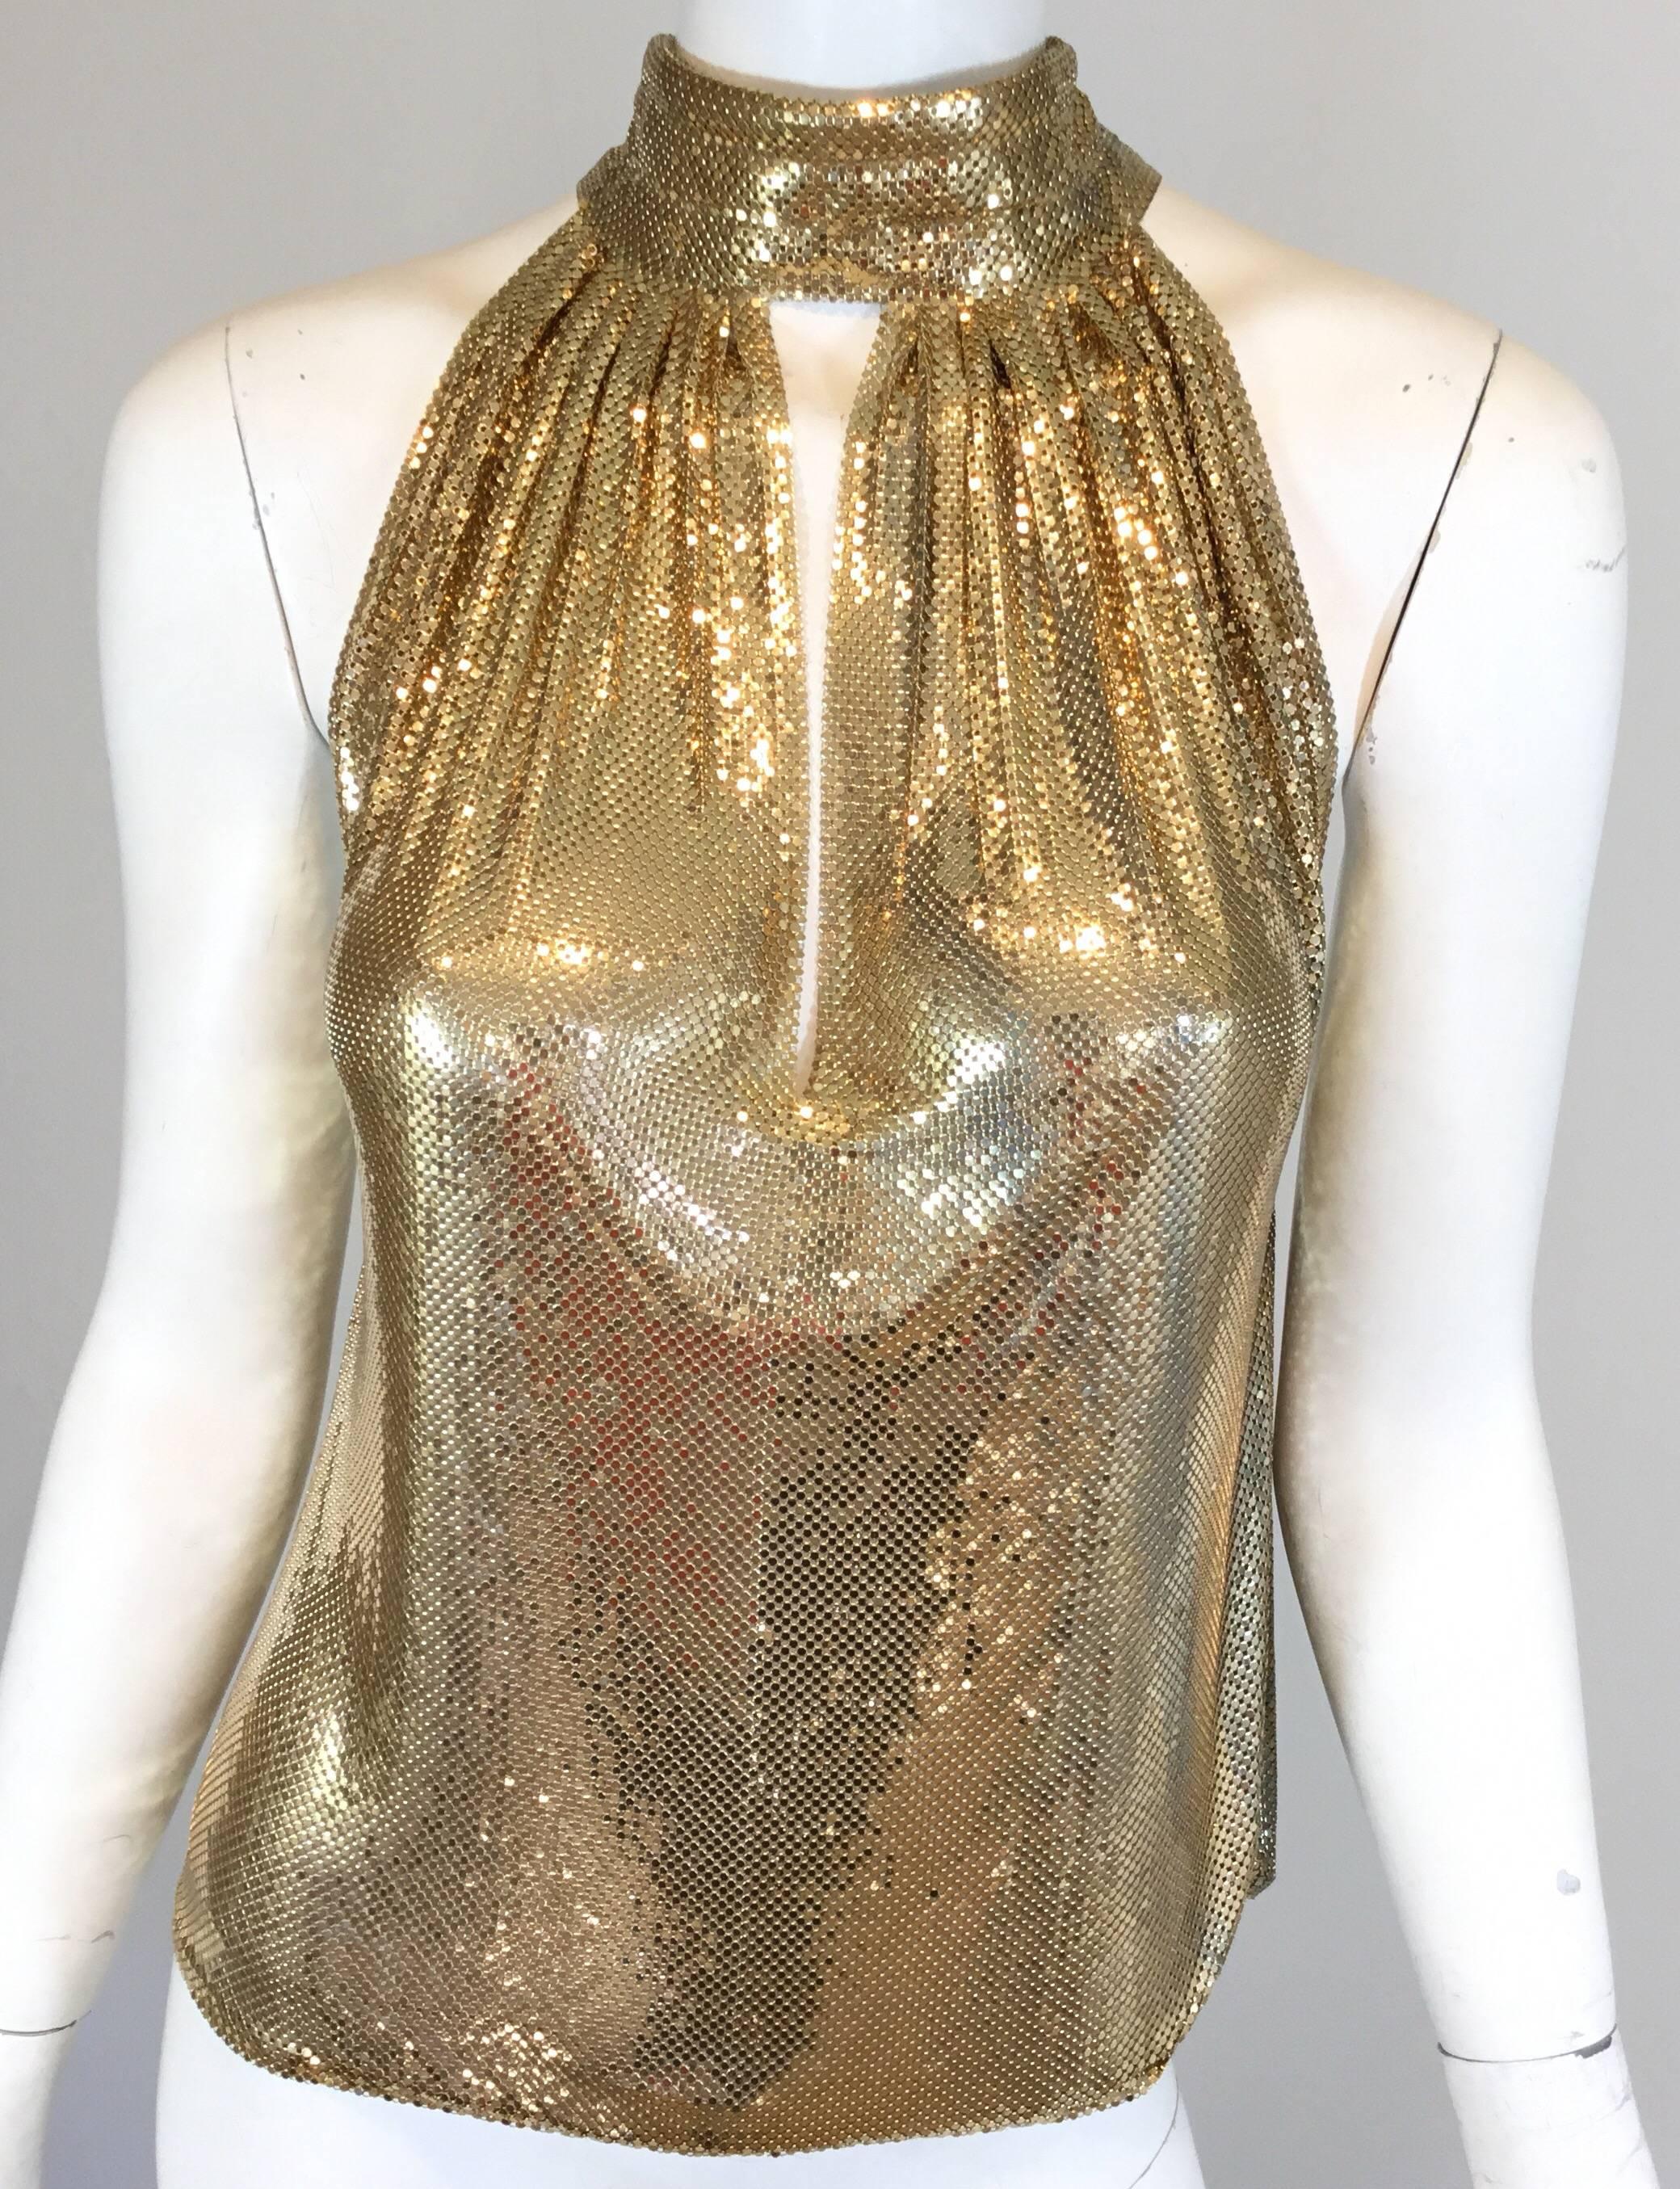 Stunning Whiting and Davis top in a gold metal mesh with a keyhole neck and a back snap button closure. Top is labeled a size small and is made in the U.S.A.

Bust- 34''
Length- 23''